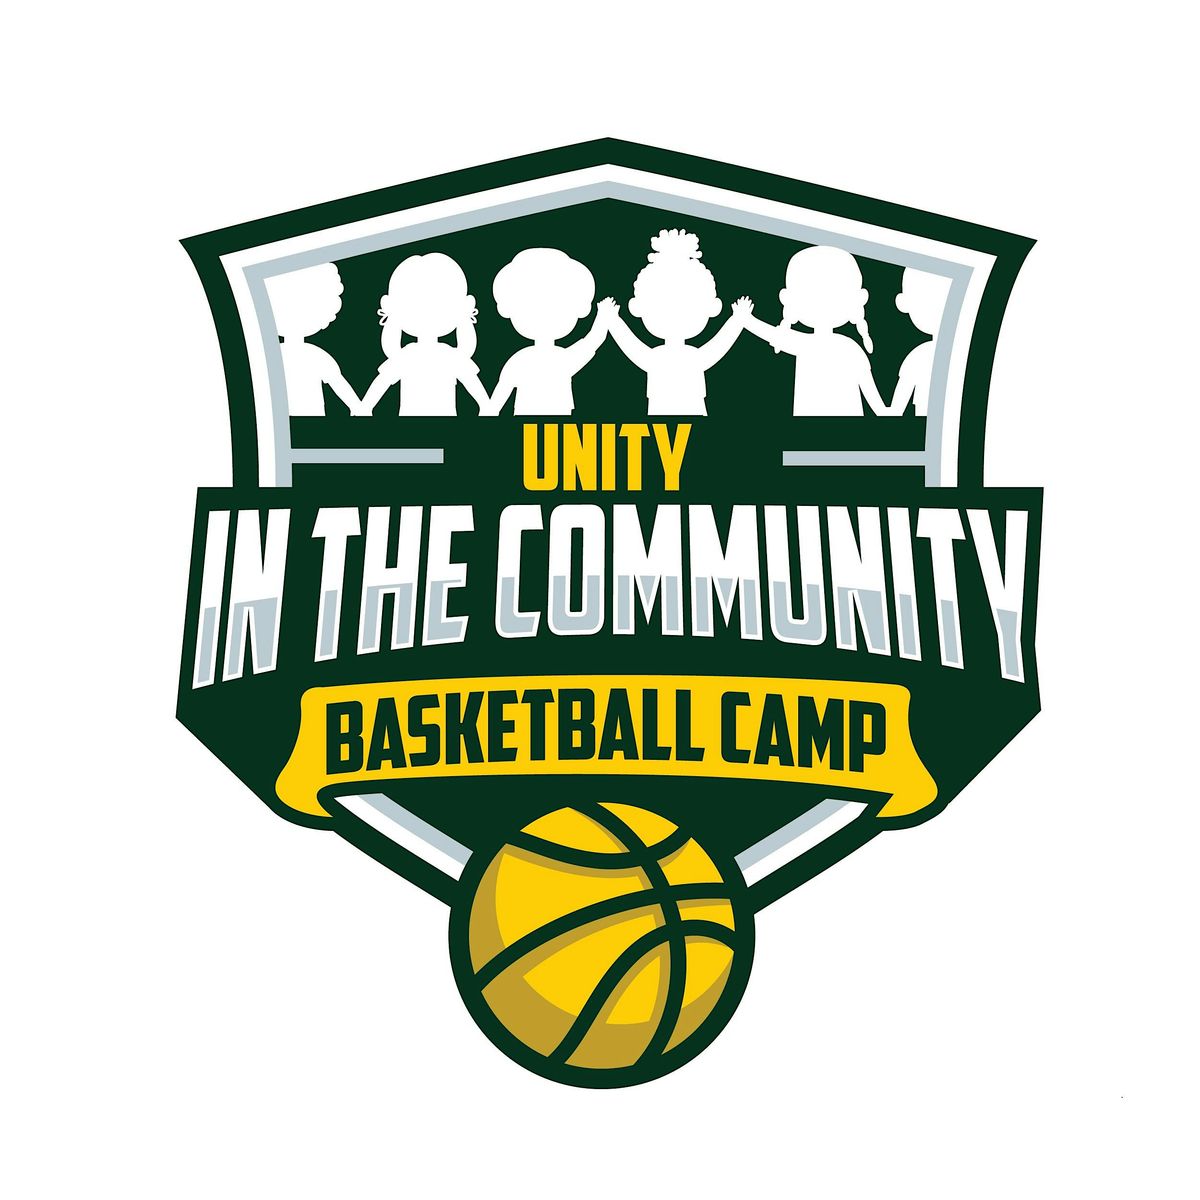 Unity in the Community Basketball Camp